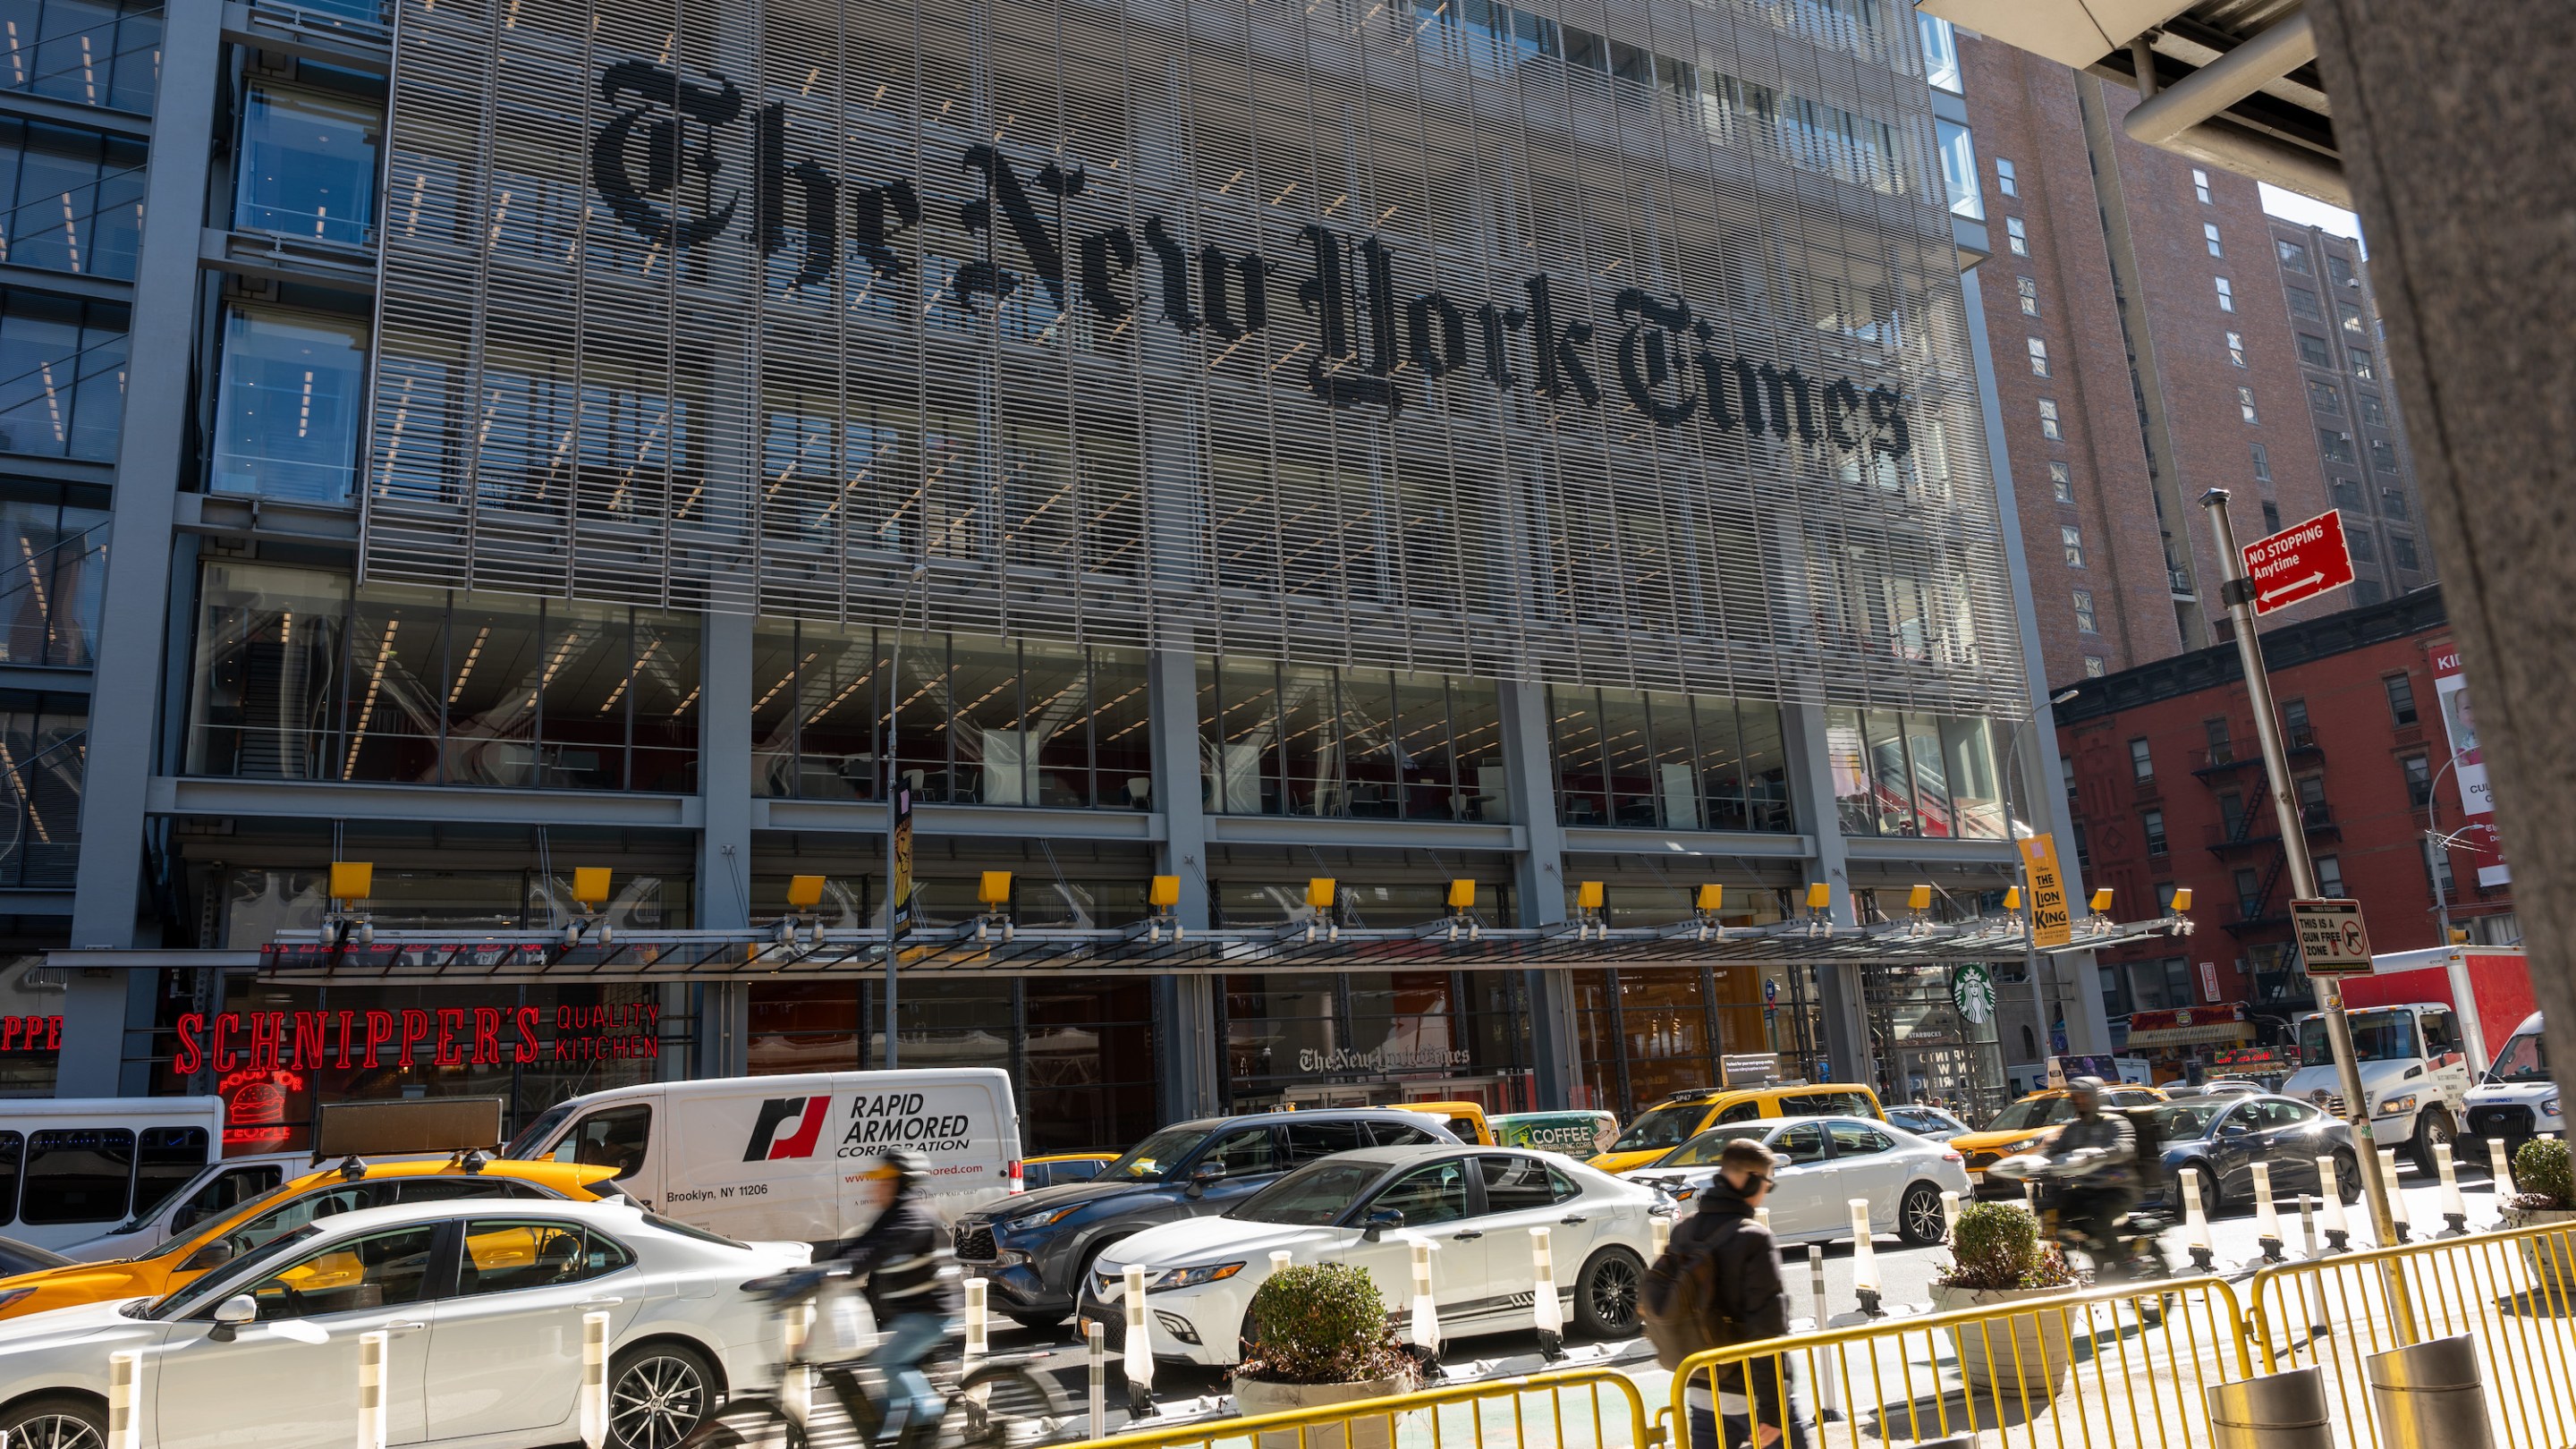 The front of the New York Times building